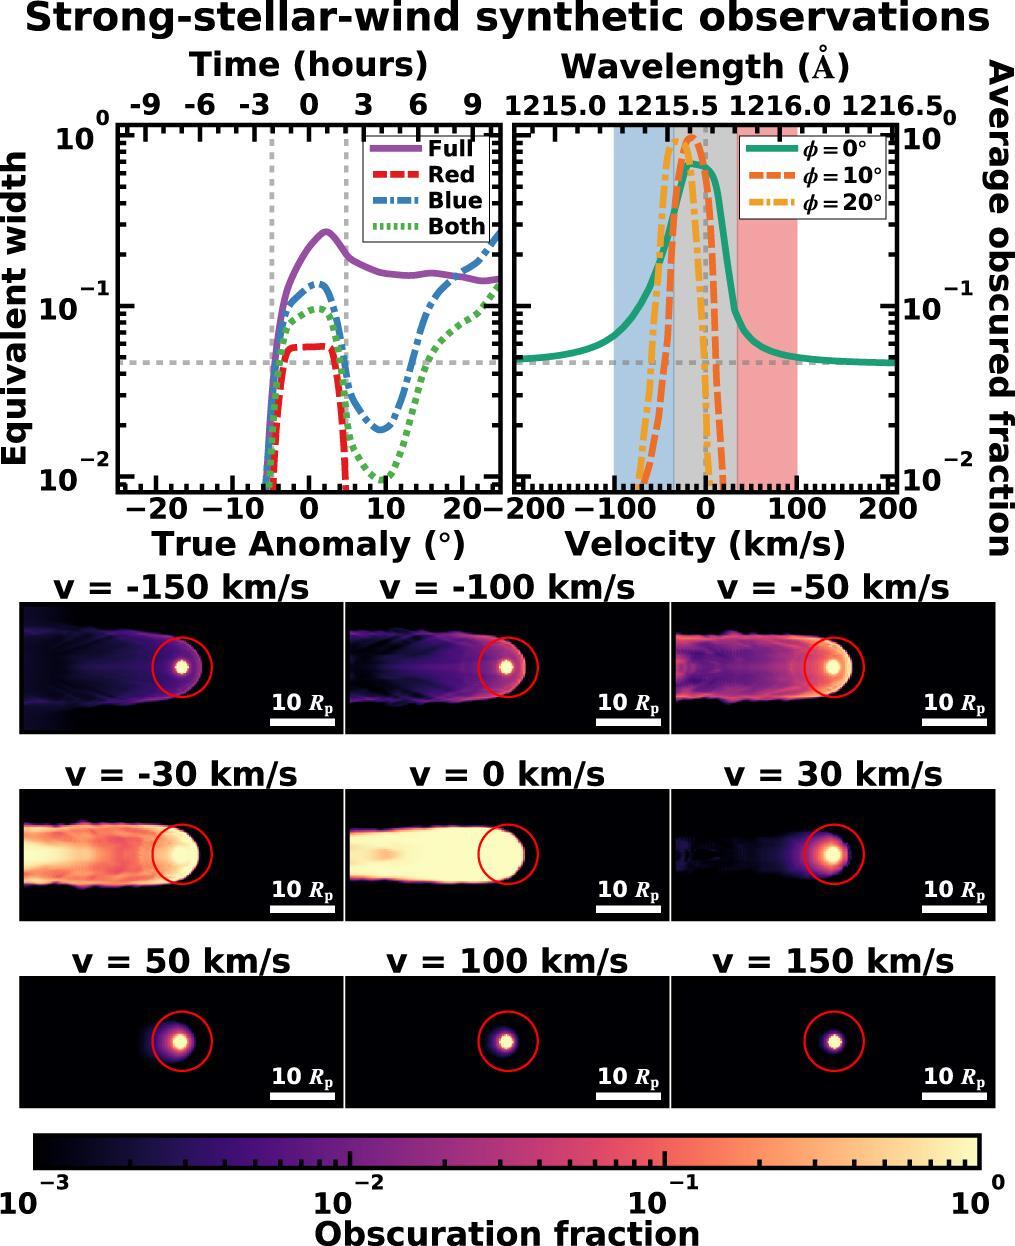 Morphology of Hydrodynamic Winds: A Study of Planetary Winds in Stellar  Environments - IOPscience